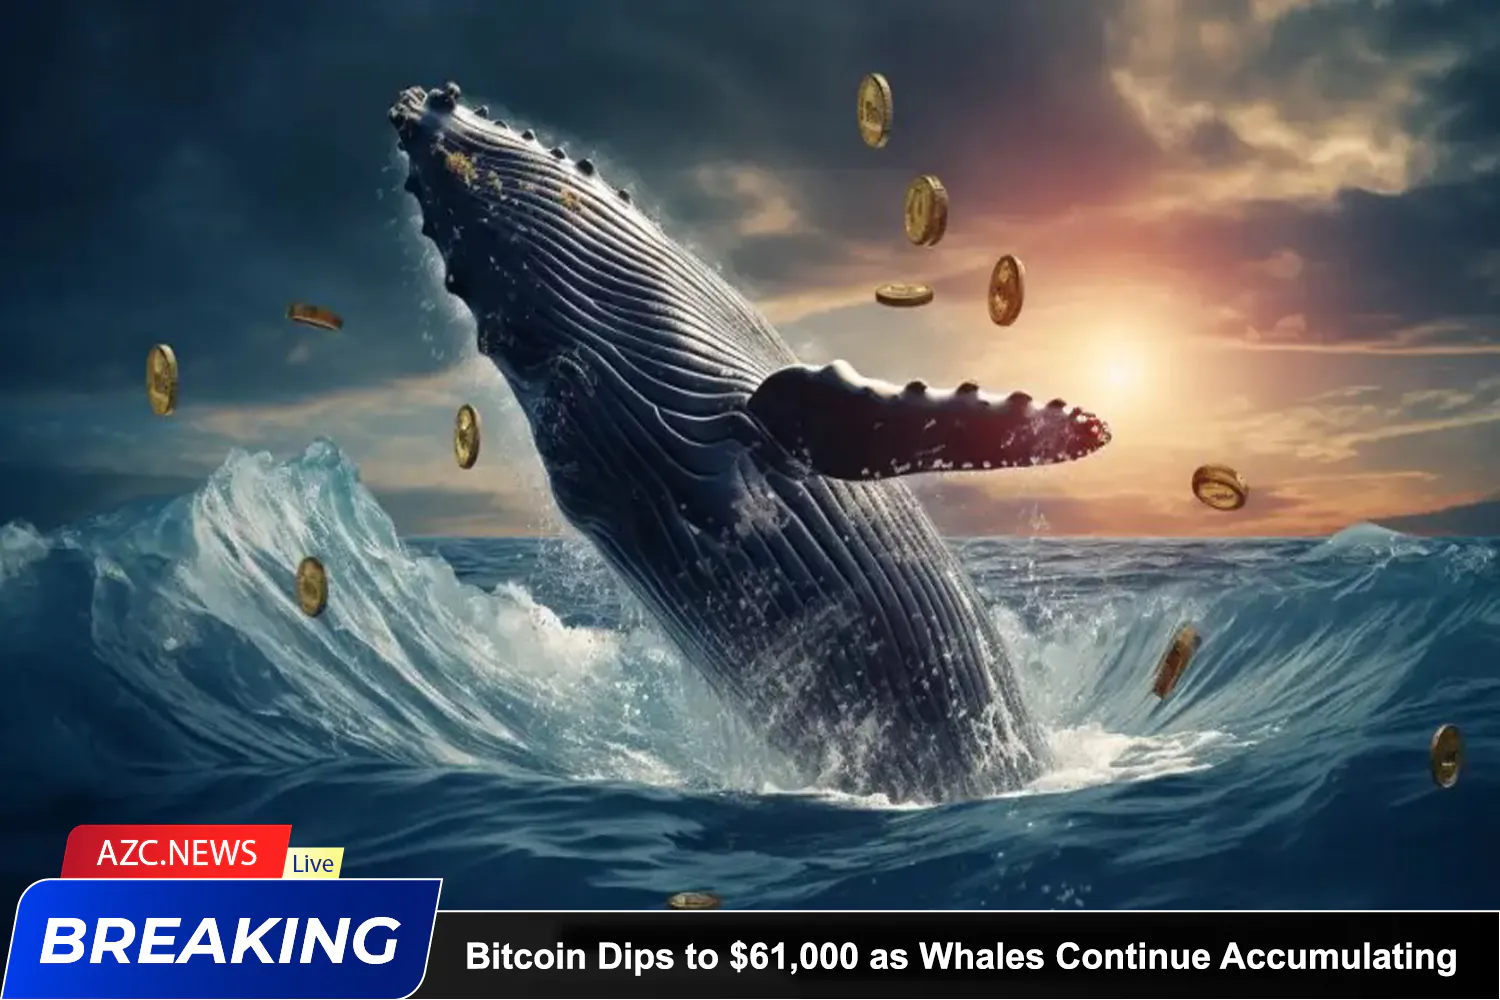 Azcnews Bitcoin Dips To $61,000 As Whales Continue Accumulating